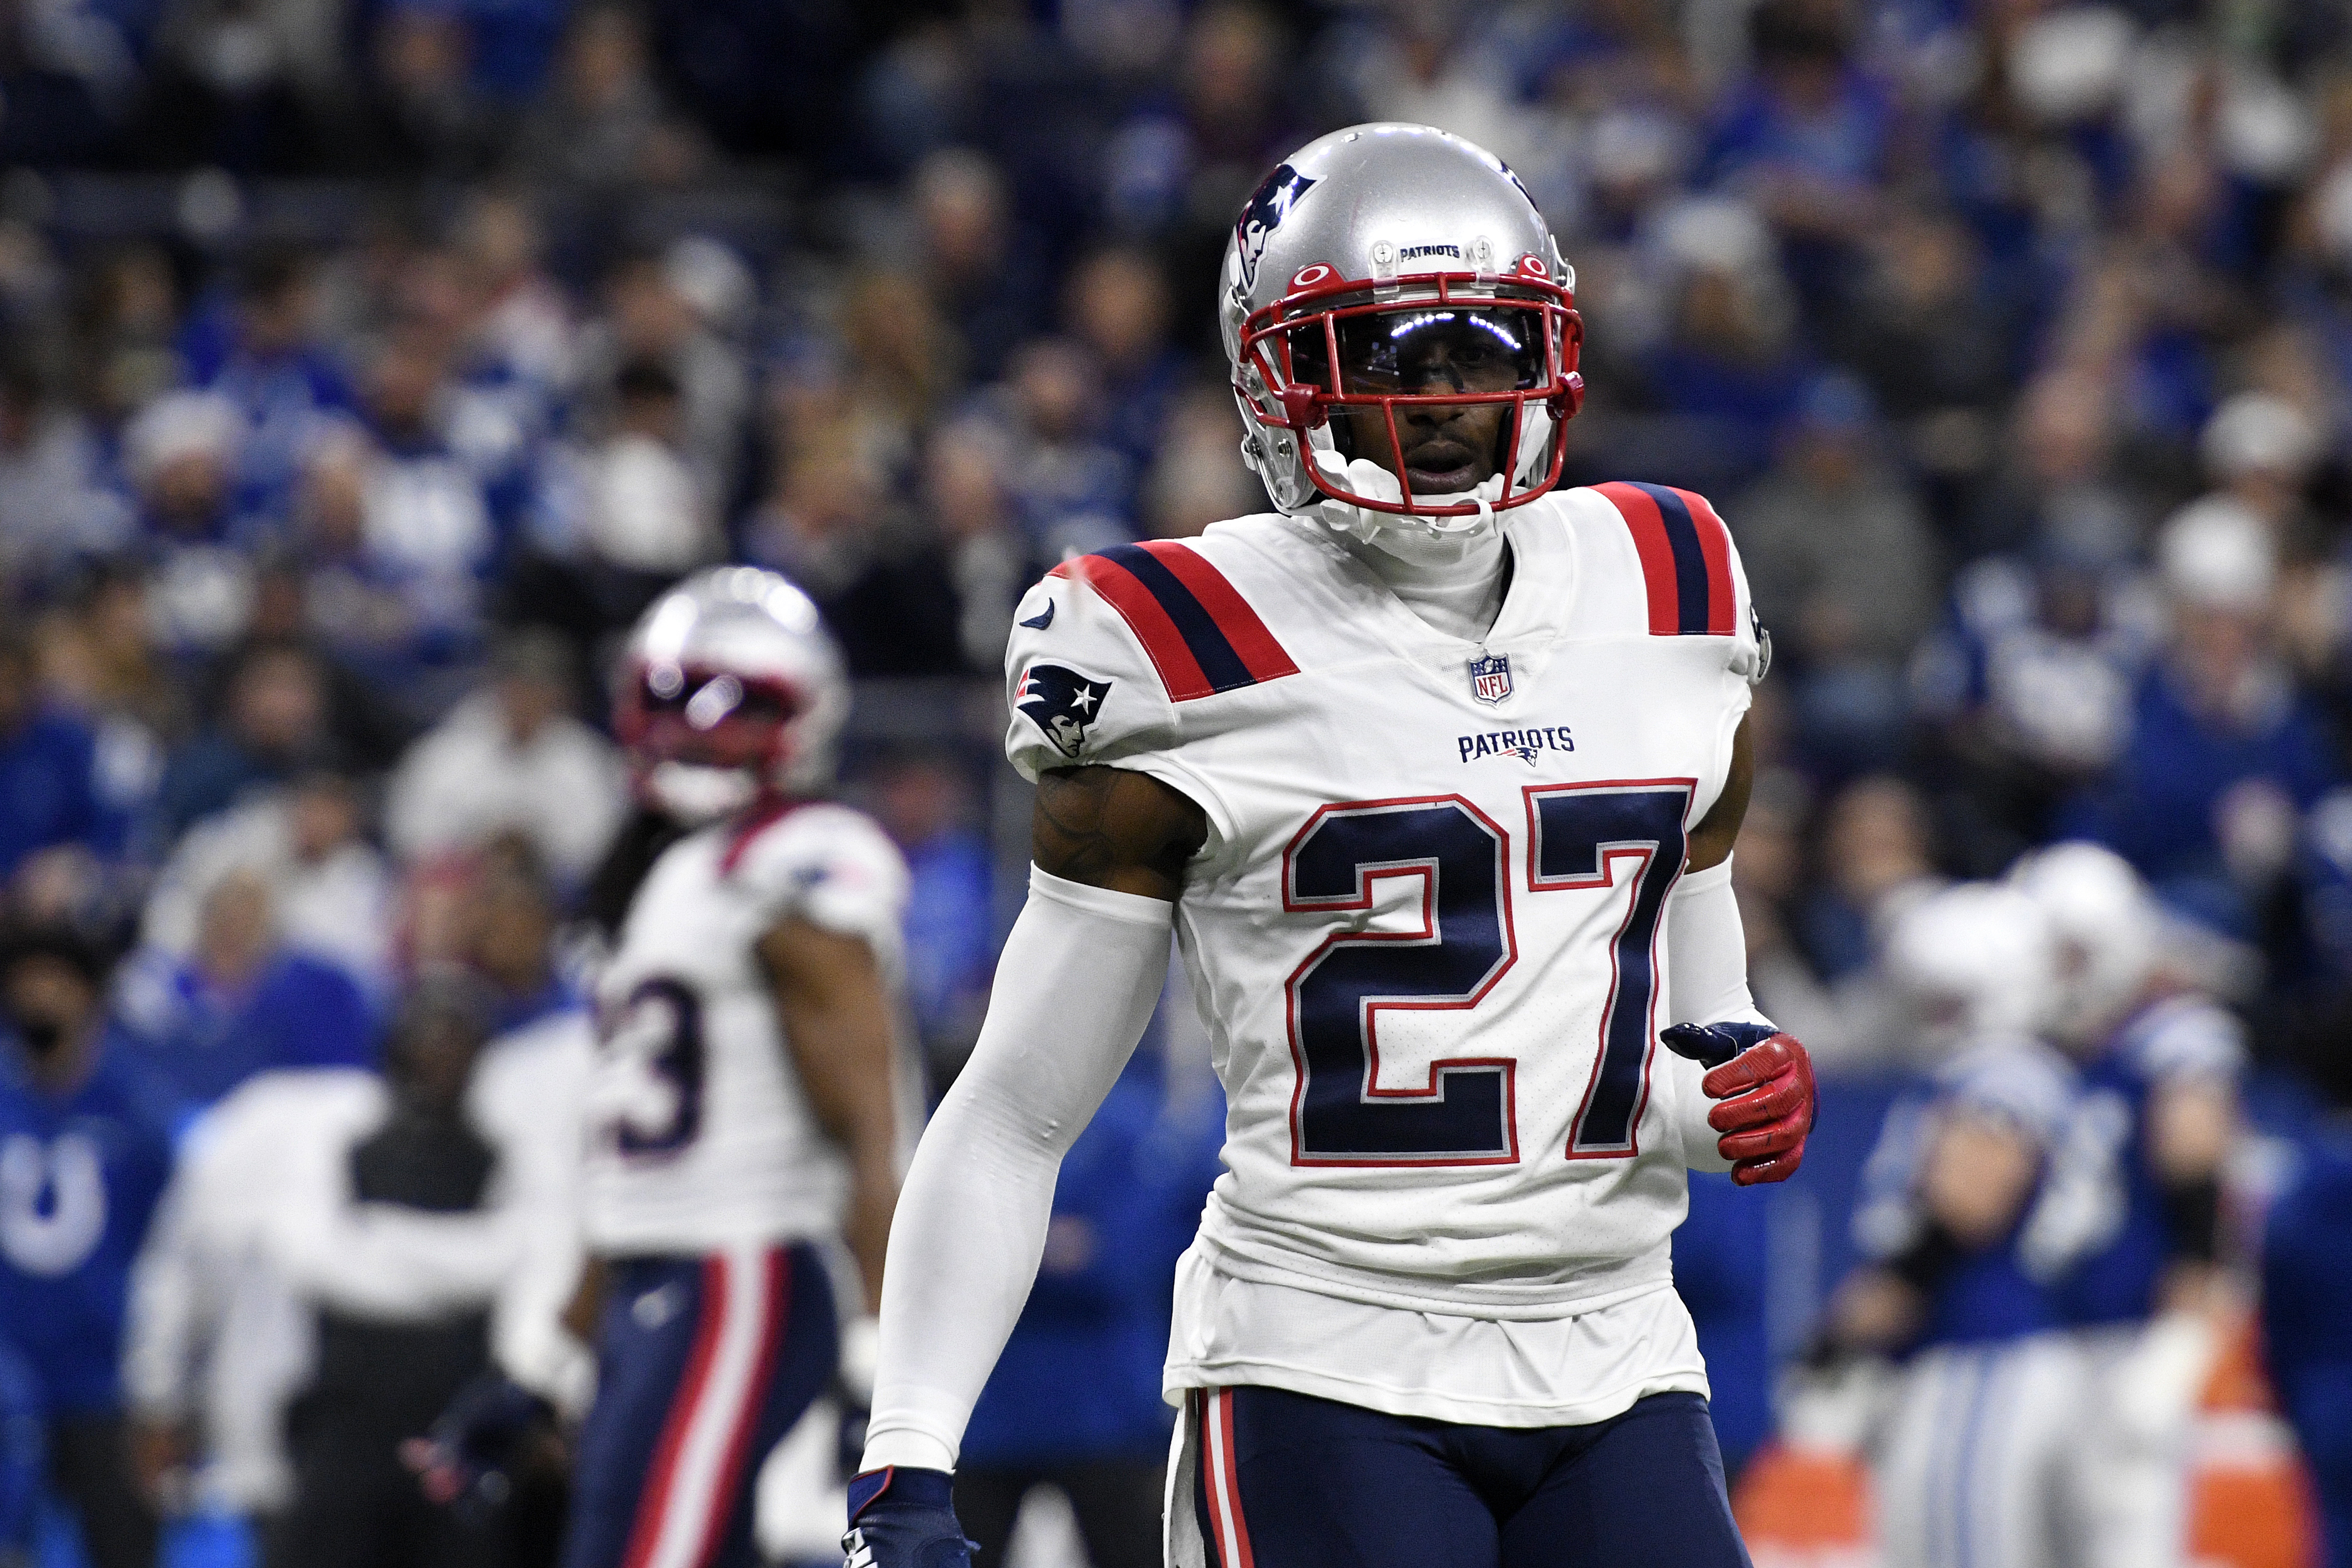 Patriots cornerback JC Jackson in action against the Colts